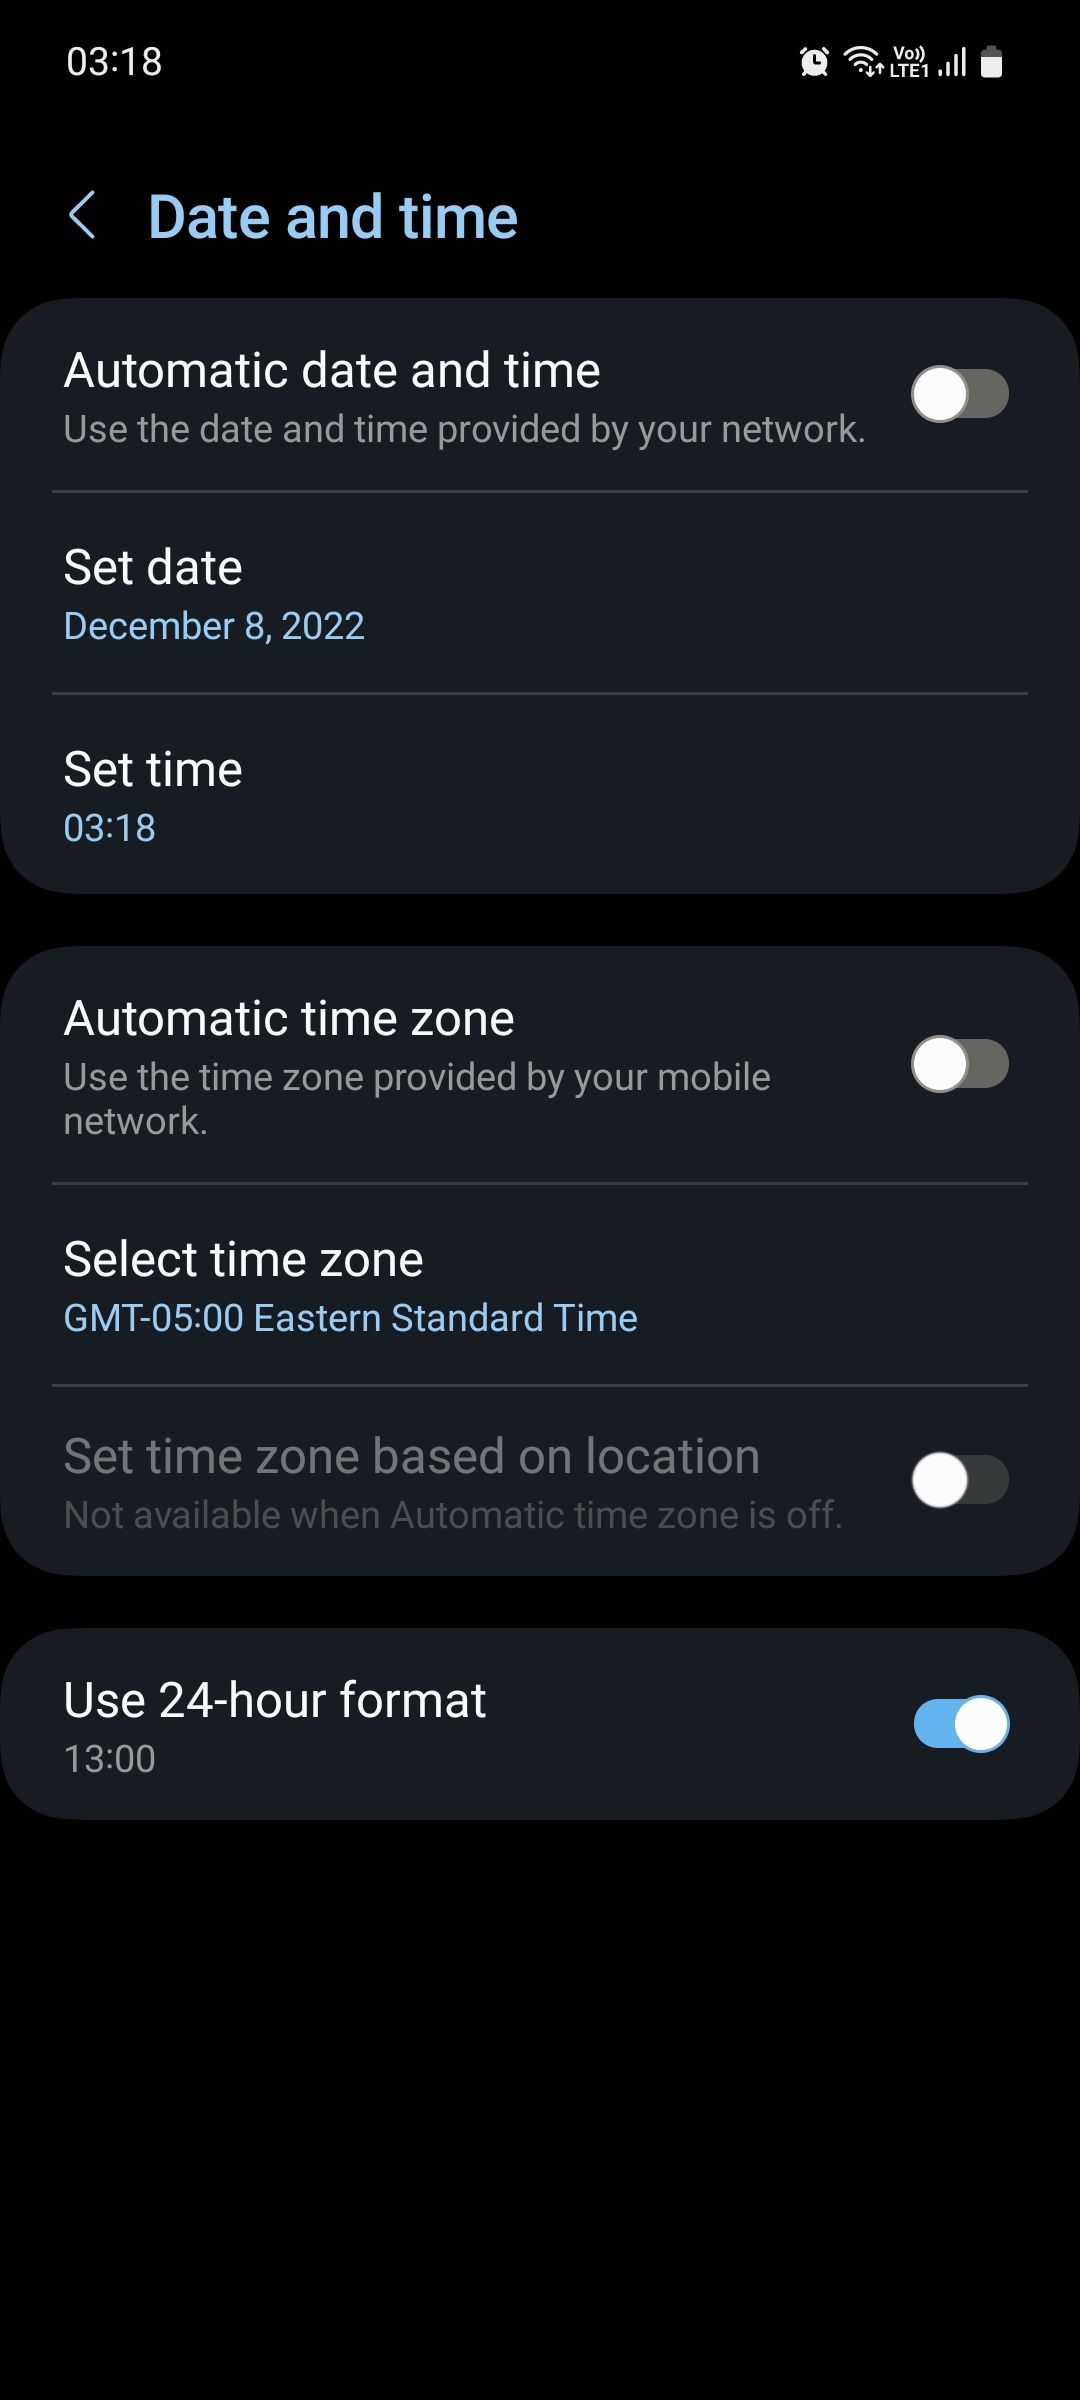 Samsung Date and time menu